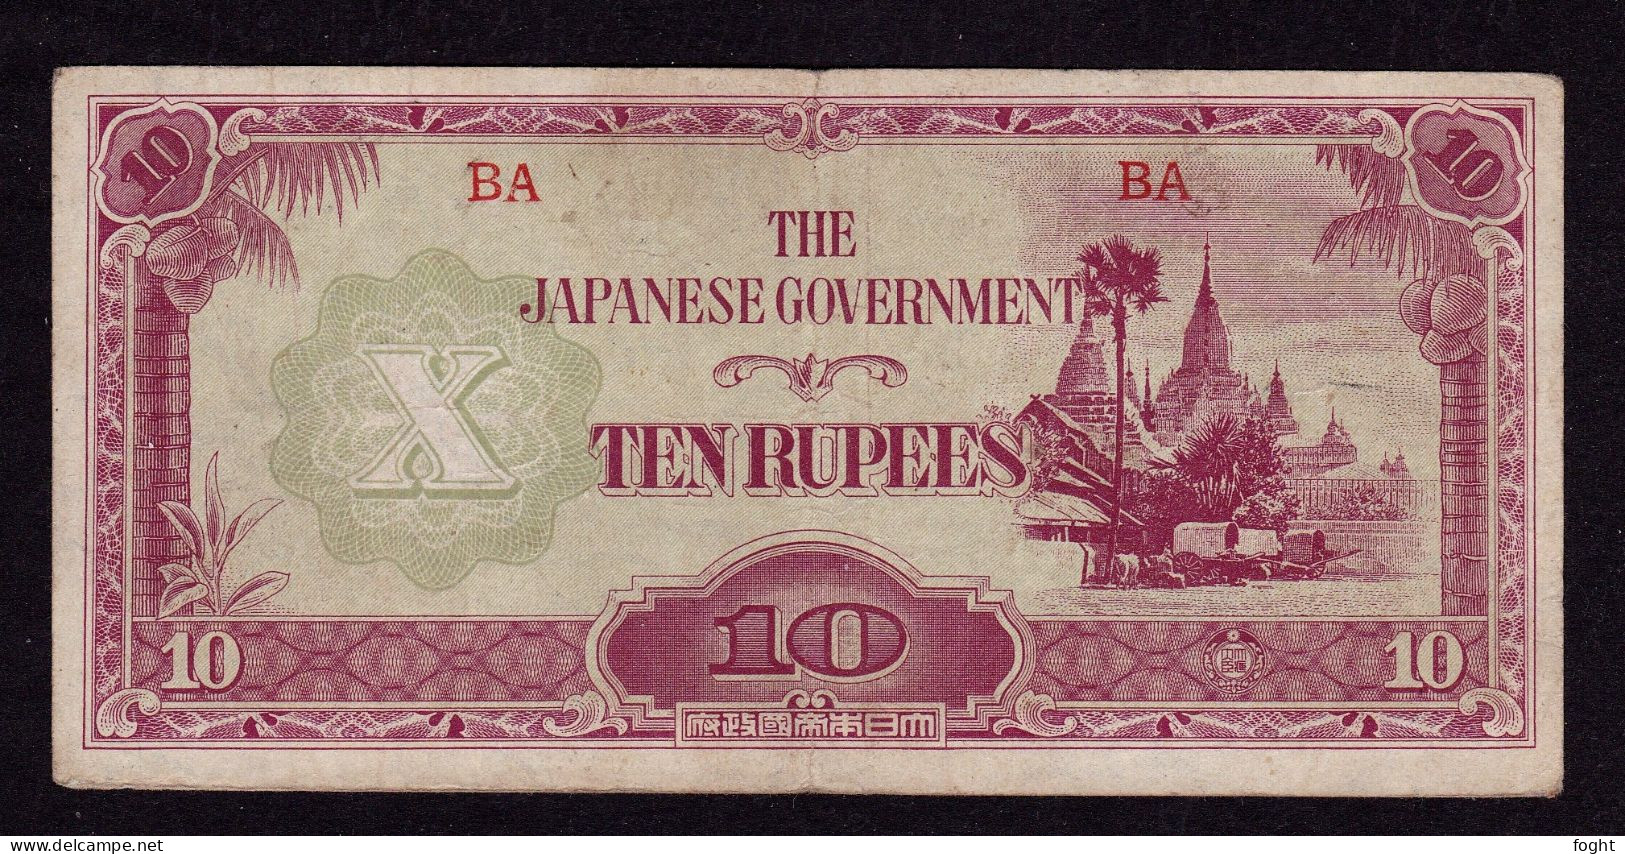 Japanese Government (Burma) Ten (10) Rupees Note - From 1942-45 (WWII) - Japan